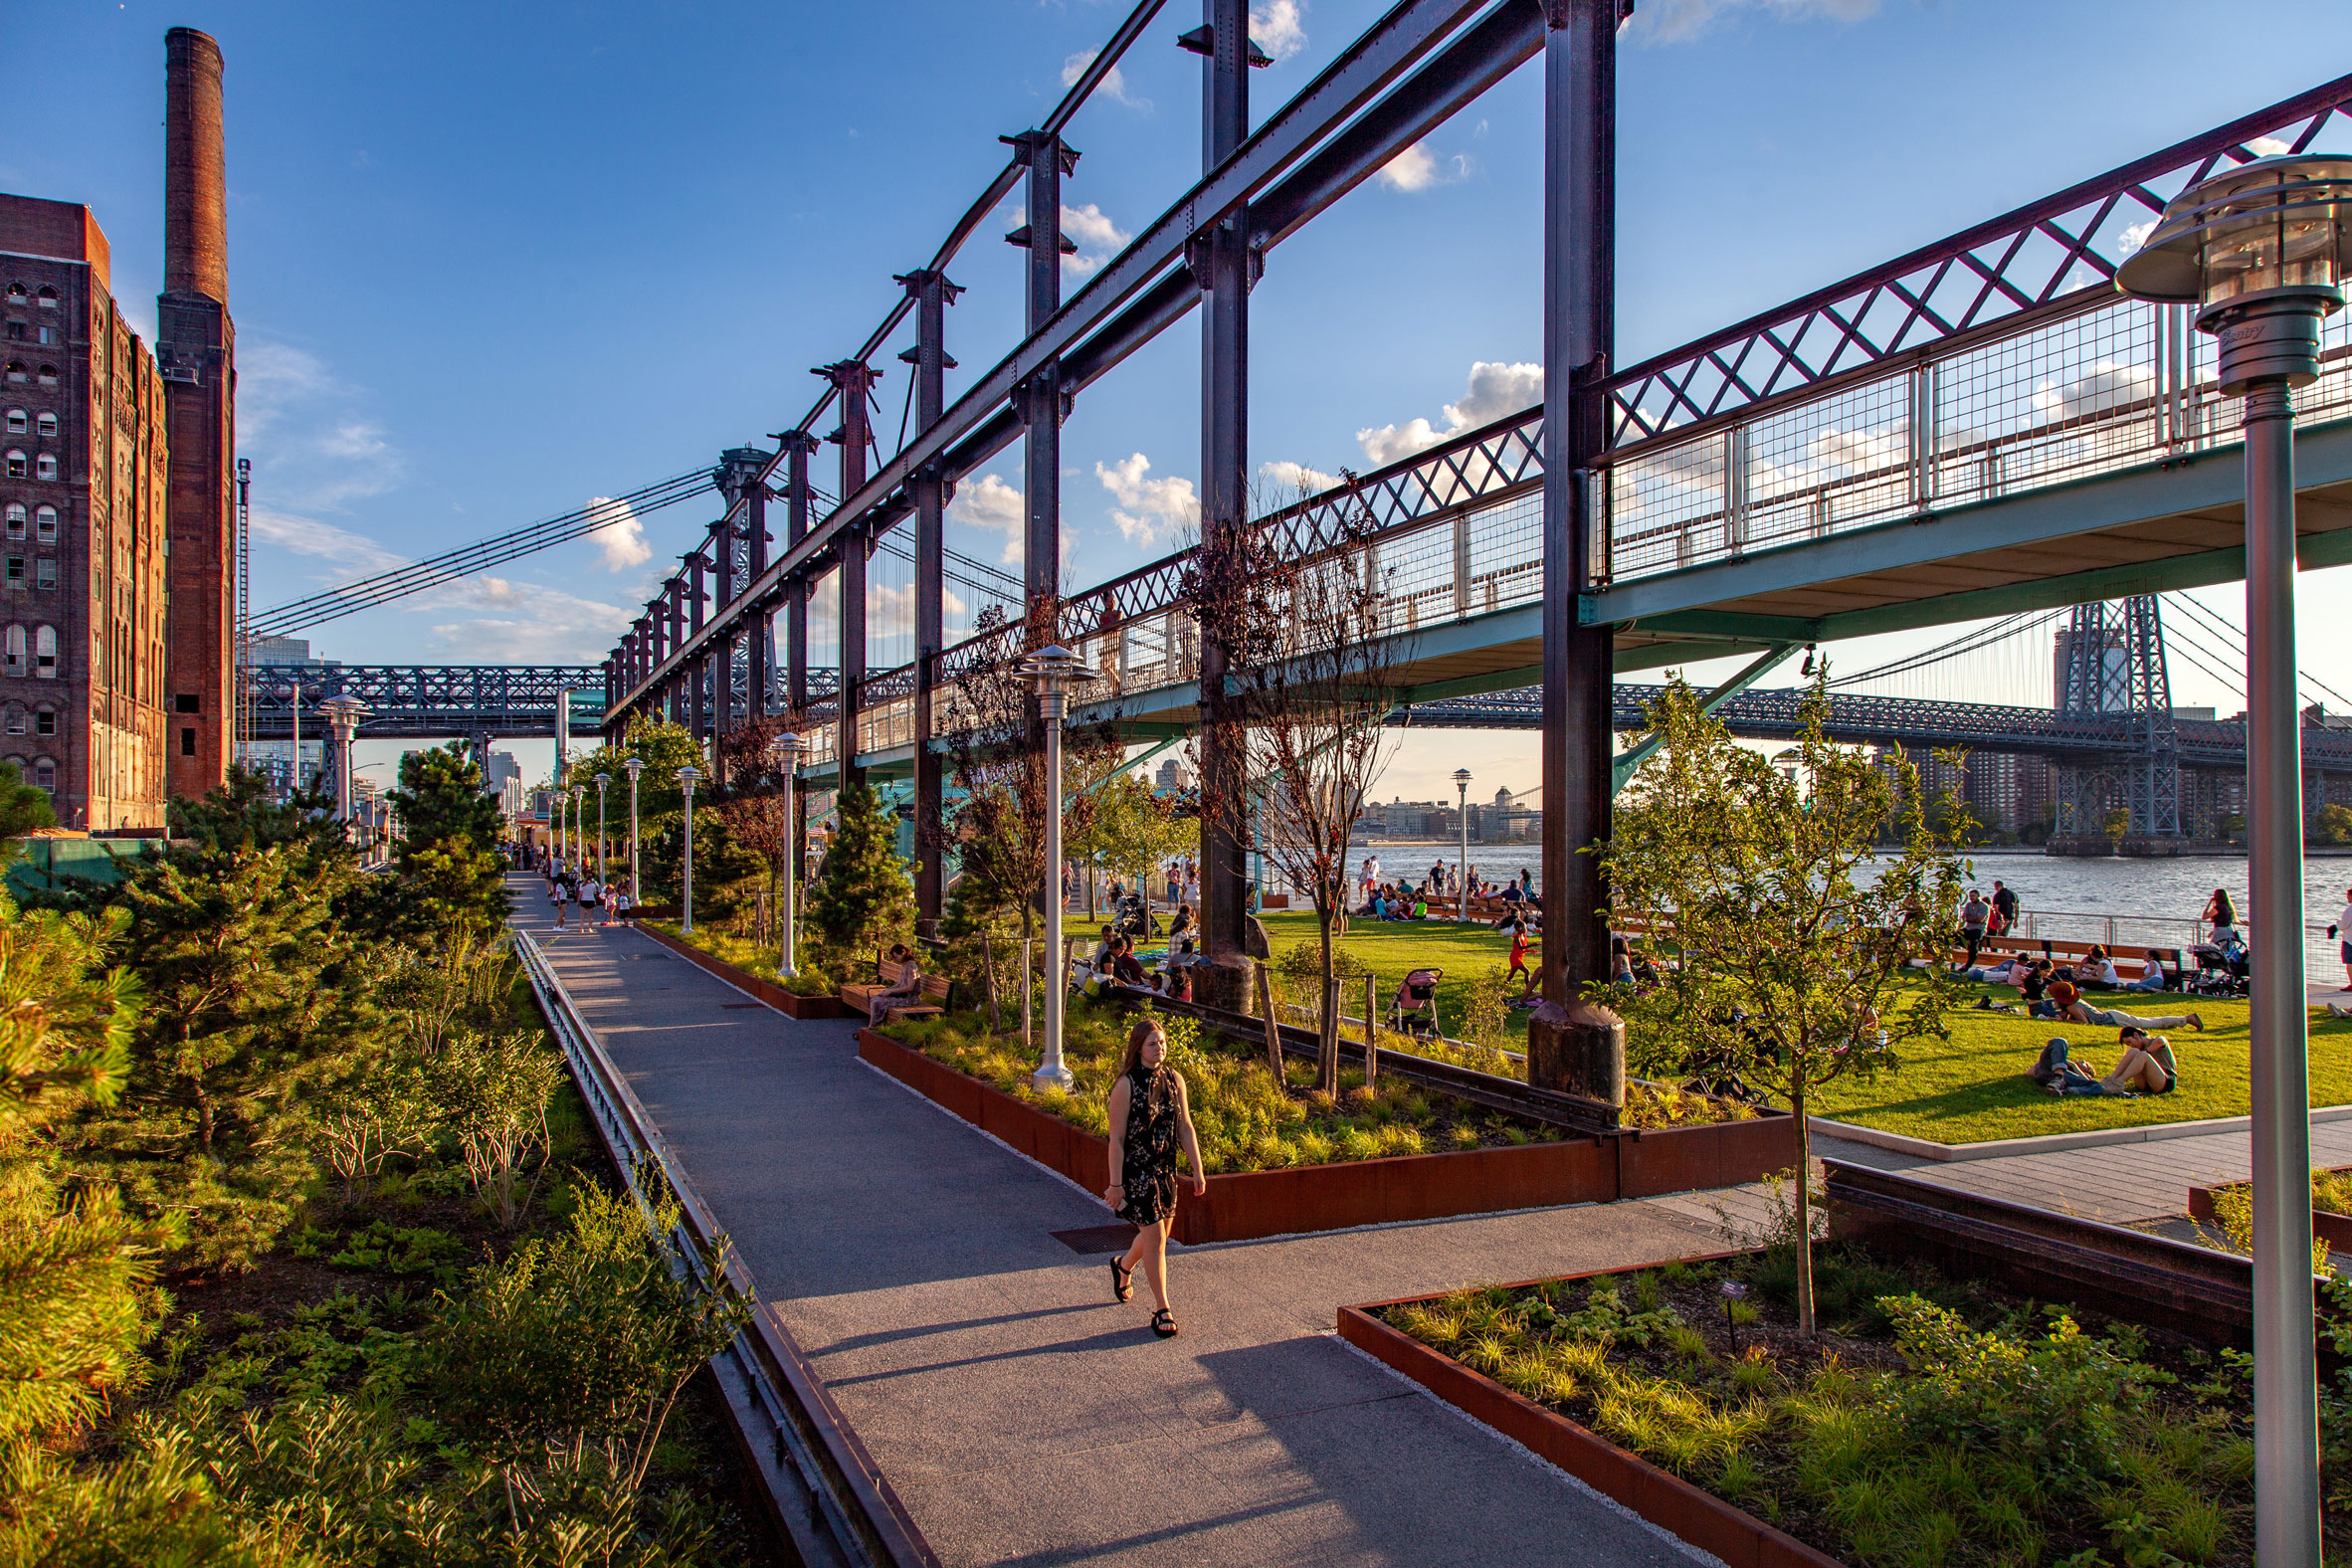 Landscape architecture at Domino Park, New York City